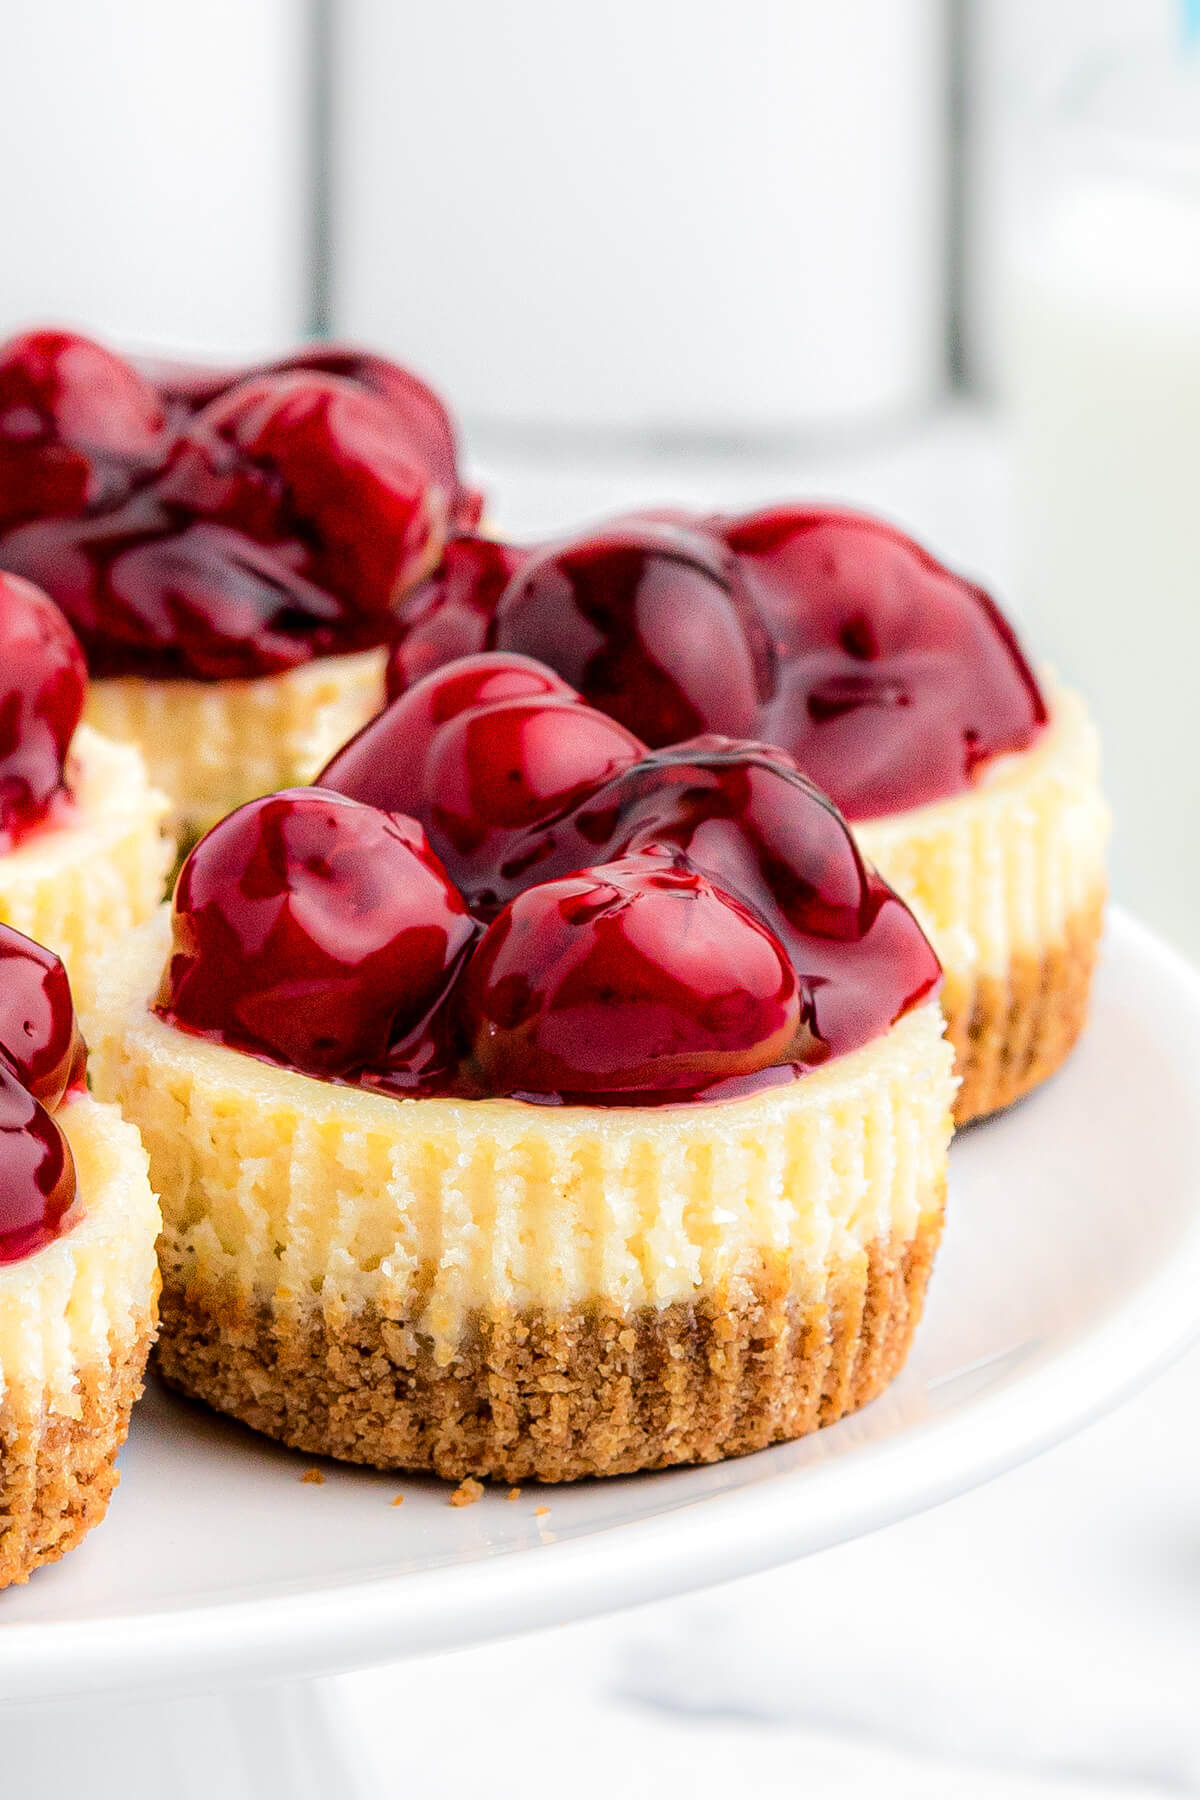 A group of Mini Cherry Cheesecakes showing the base graham crumb layer, middle cheesecake layer and glossy cherry pie filling topping.